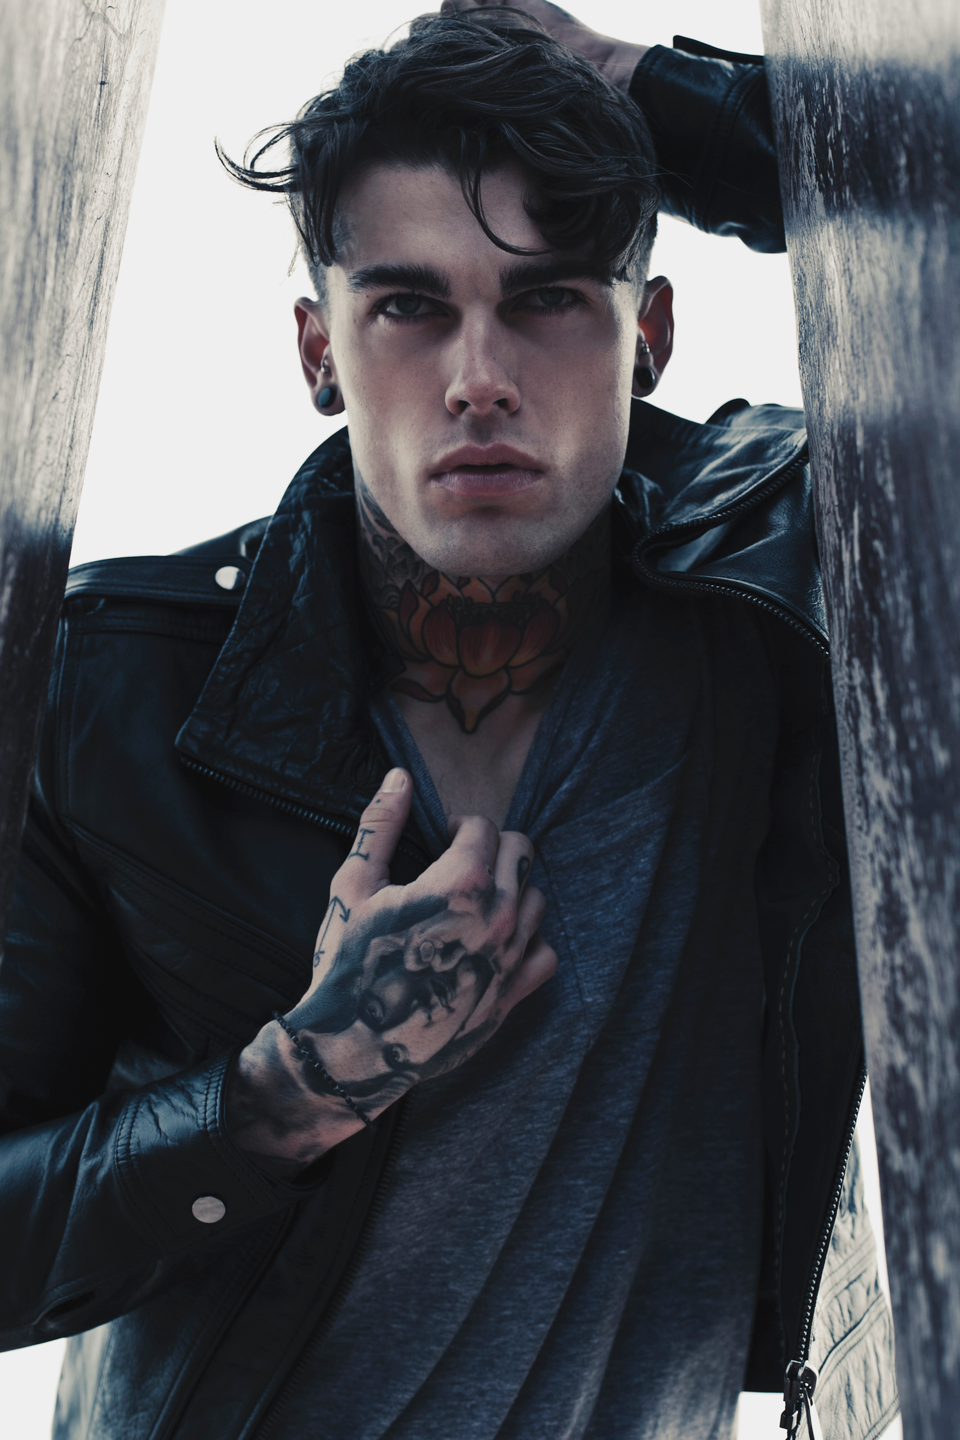 INK IT UP Traditional Tattoos: Tattooed model Stephen James